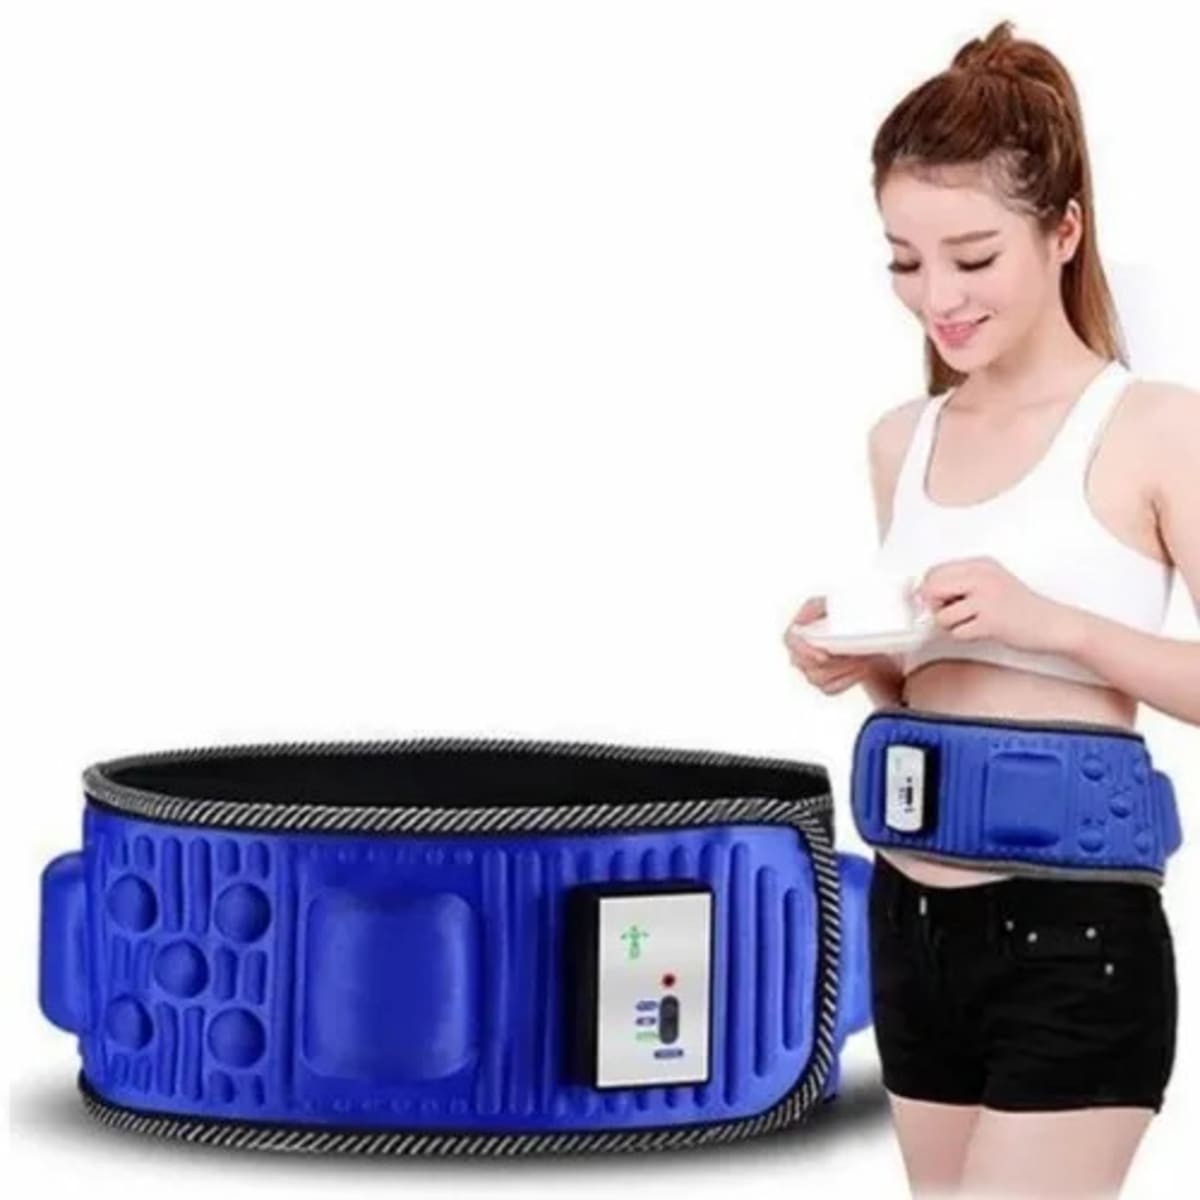 X5 slim super belt breaks fat by high frequency, this high frequency breaks  fat and makes rapid conversion of fat into amino acids. P